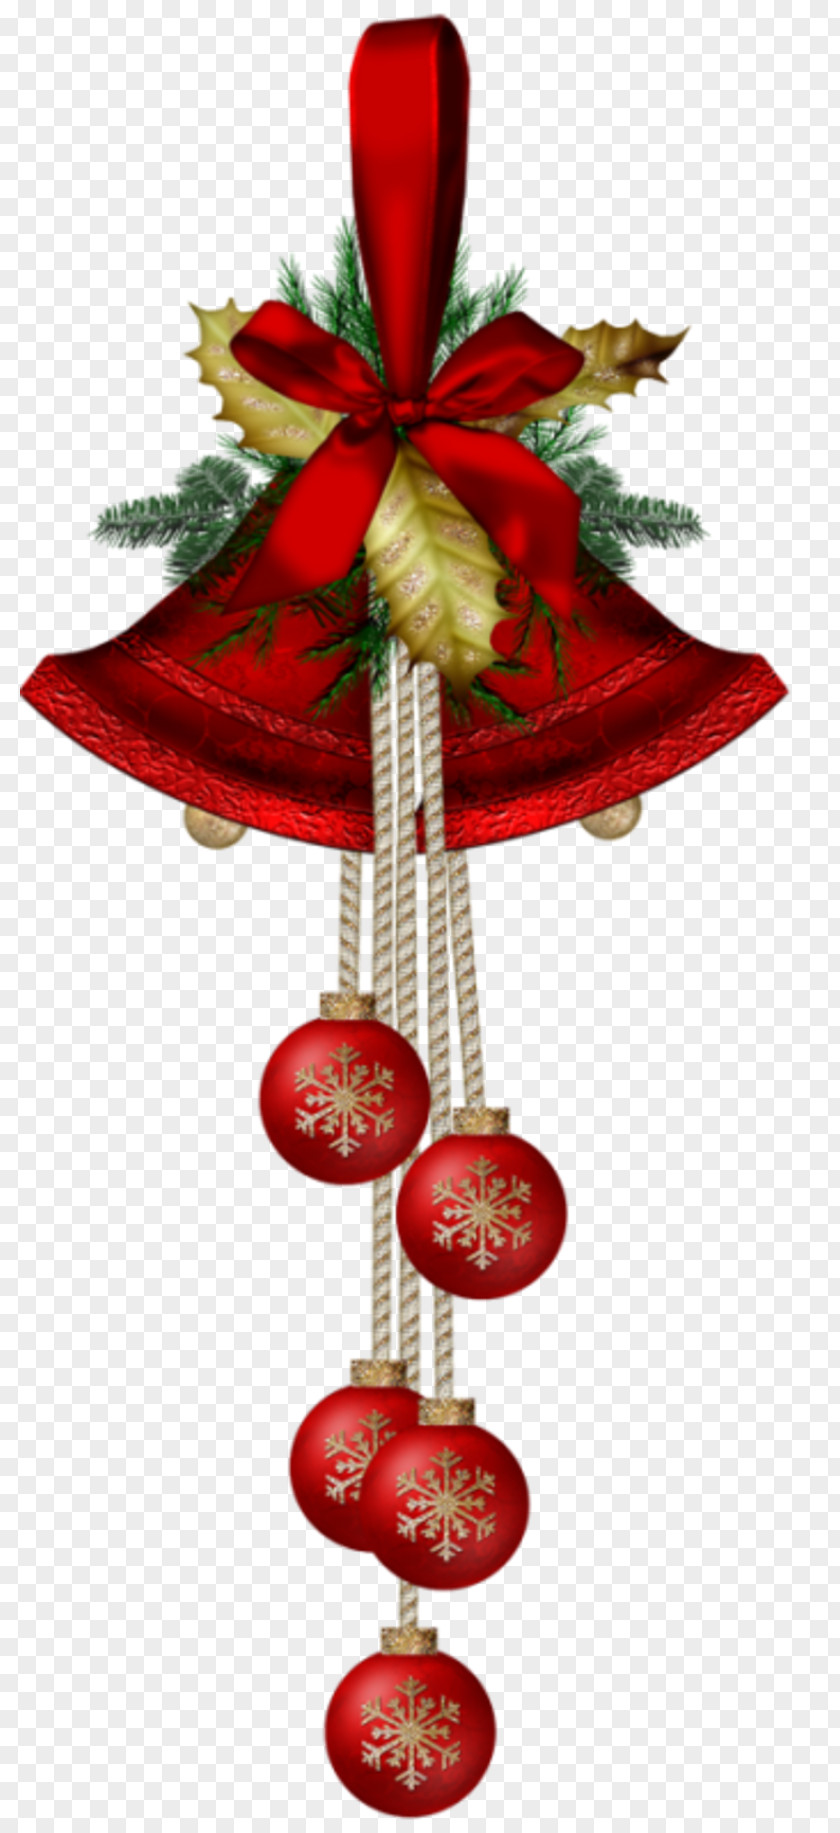 Free Christmas Pictures Daquan Pull Santa Claus Decoration Clip Art PNG